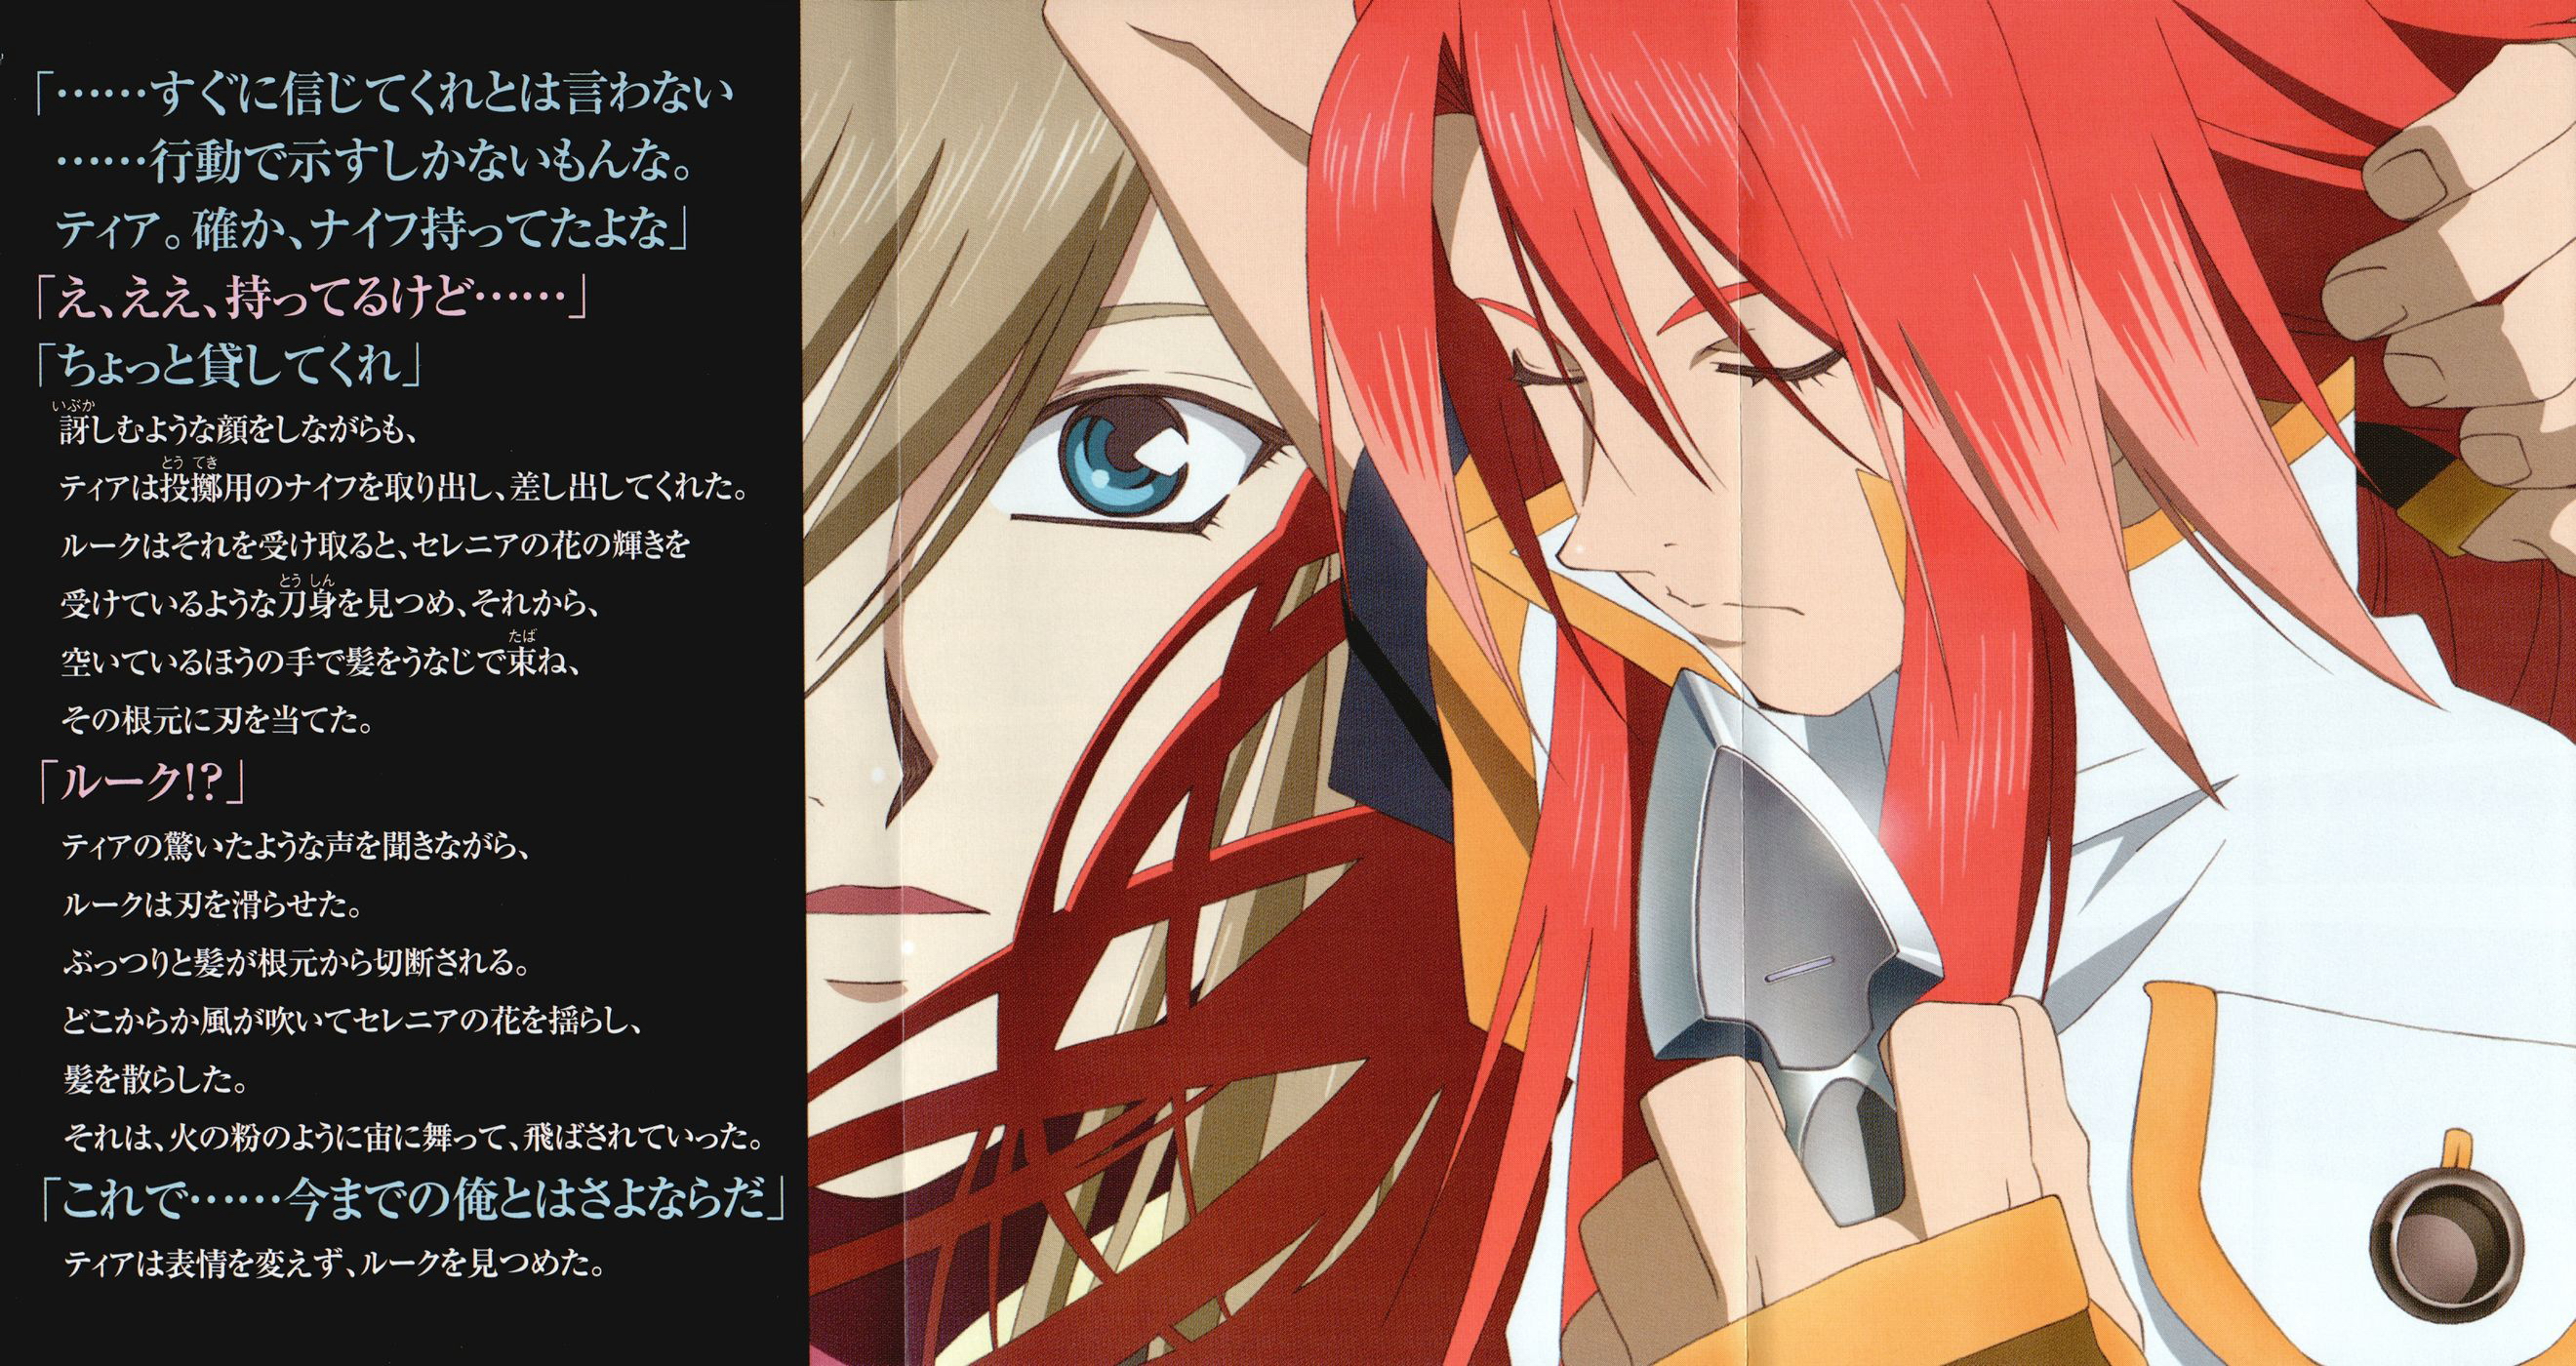 Tales Of The Abyss Puter Wallpaper Desktop Background